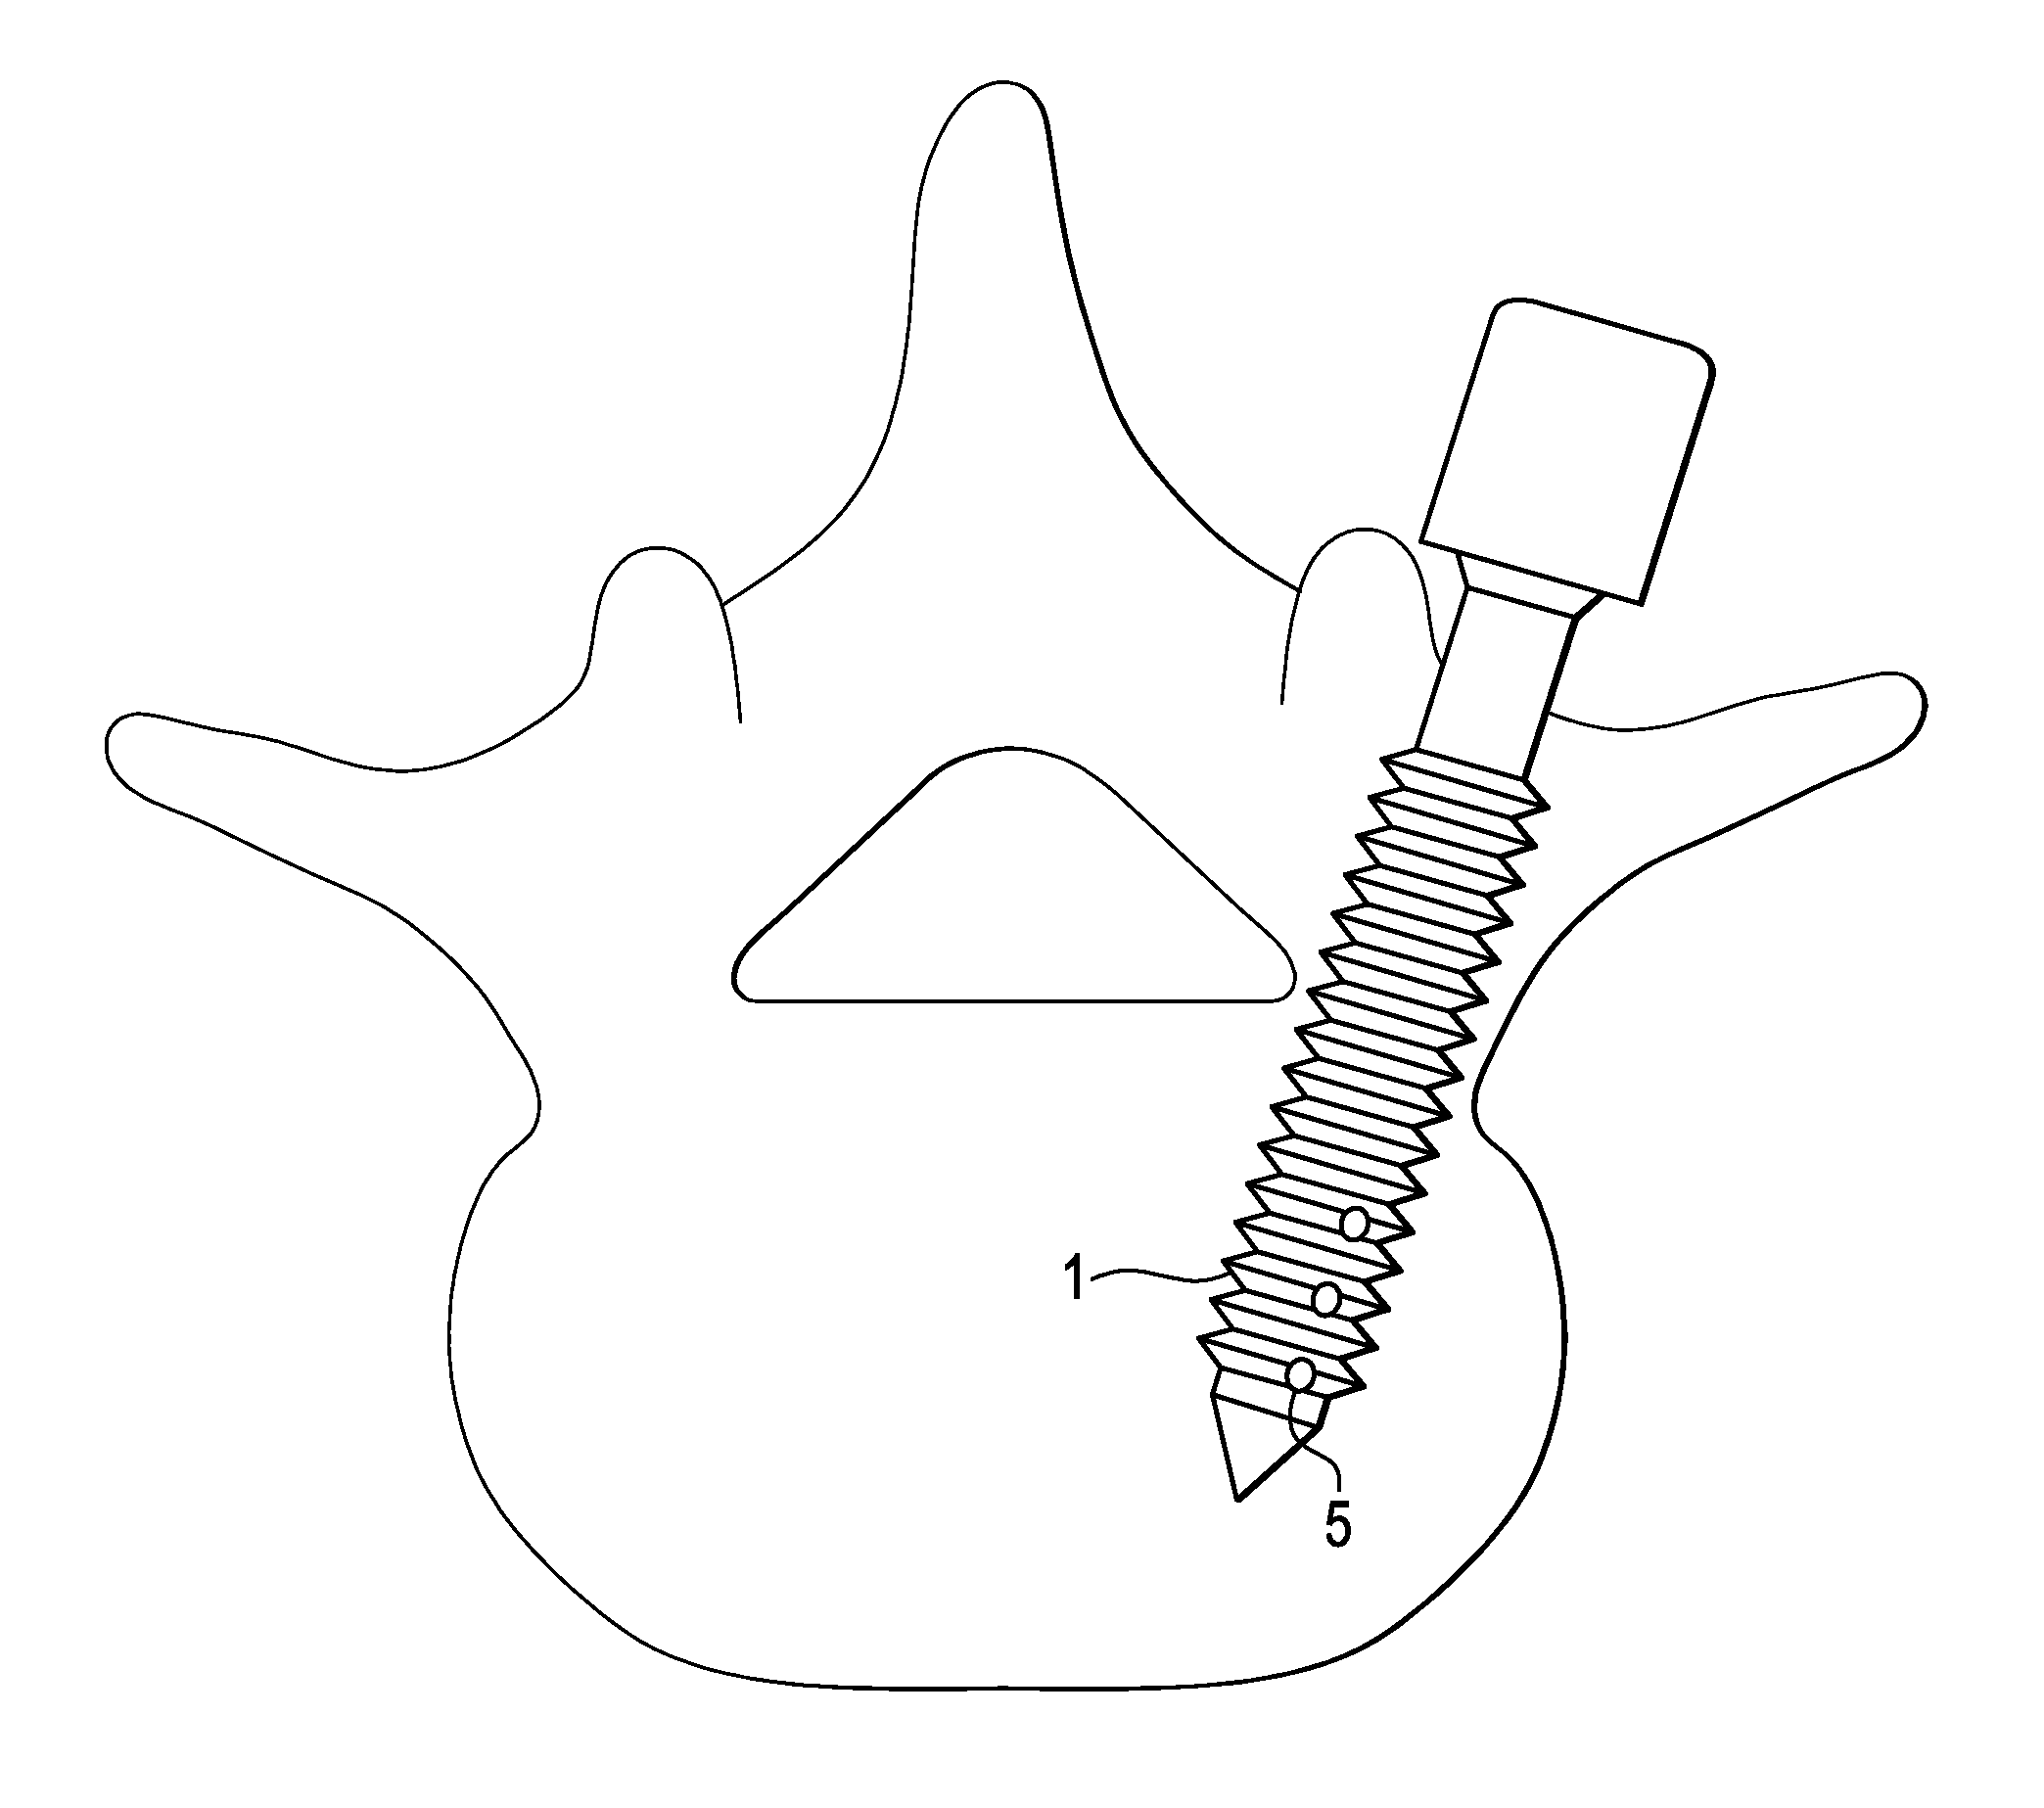 Methods and Devices for Correcting Spinal Deformity With Pharmaceutical-Eluting Pedicle Screws